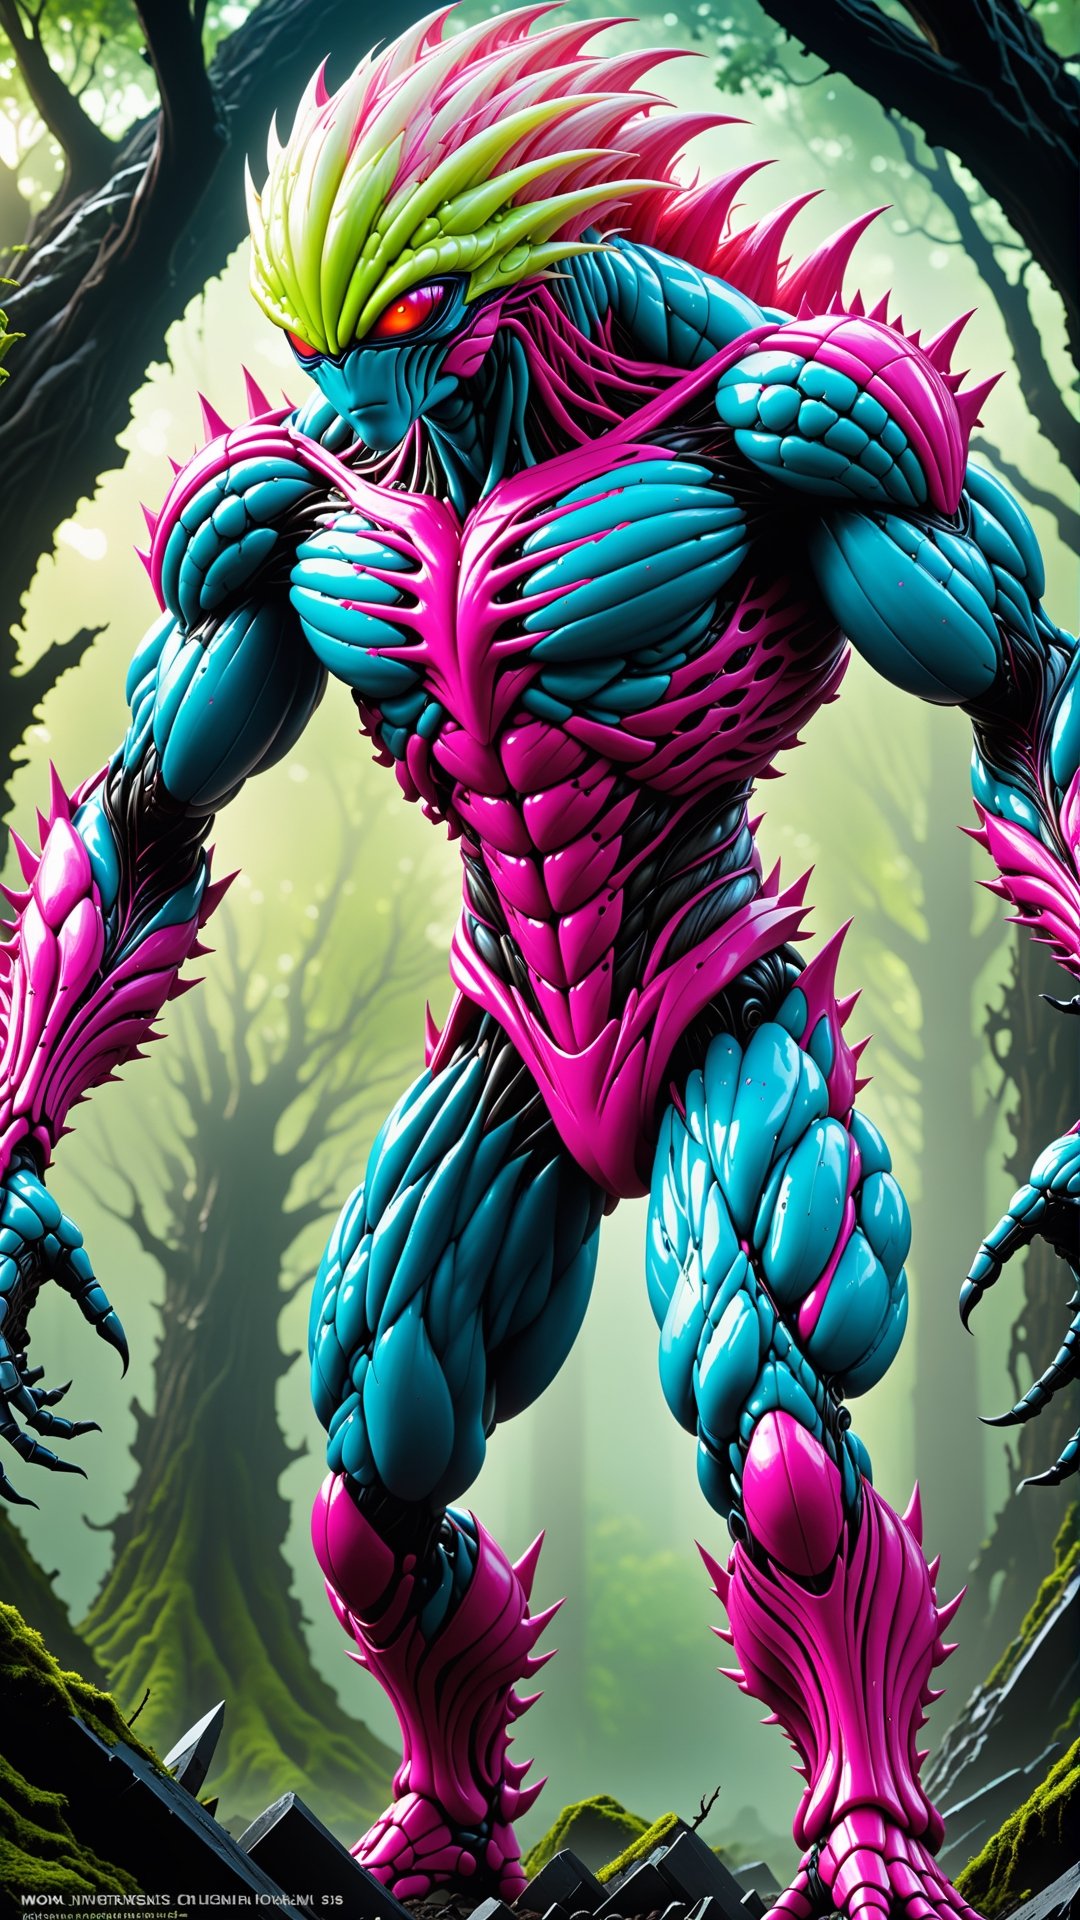 alien_ent_abomination_alf, athletic, cream and pink color, creepy and scary, fantasy, unreal, fantastic in a haunted landscape, full body, from front view,

PNG image format, sharp lines and borders, solid blocks of colors, over 300ppp dots per inch, 32k ultra high definition, 530MP, Fujifilm XT3, cinematographic, (photorealistic:1.6), 4D, High definition RAW color professional photos, photo, masterpiece, realistic, ProRAW, realism, photorealism, high contrast, digital art trending on Artstation ultra high definition detailed realistic, detailed, skin texture, hyper detailed, realistic skin texture, facial features, armature, best quality, ultra high res, high resolution, detailed, raw photo, sharp re, lens rich colors hyper realistic lifelike texture dramatic lighting unrealengine trending, ultra sharp, pictorial technique, (sharpness, definition and photographic precision), (contrast, depth and harmonious light details), (features, proportions, colors and textures at their highest degree of realism), (blur background, clean and uncluttered visual aesthetics, sense of depth and dimension, professional and polished look of the image), work of beauty and complexity. perfectly symmetrical body.

(aesthetic + beautiful + harmonic:1.5), (ultra detailed face, ultra detailed eyes, ultra detailed mouth, ultra detailed body, ultra detailed hands, ultra detailed clothes, ultra detailed background, ultra detailed scenery:1.5),

3d_toon_xl:0.8, JuggerCineXL2:0.9, detail_master_XL:0.9, detailmaster2.0:0.9, perfecteyes-000007:1.3,monster,biopunk style,zhibi,DonM3l3m3nt4lXL,alienzkin,moonster